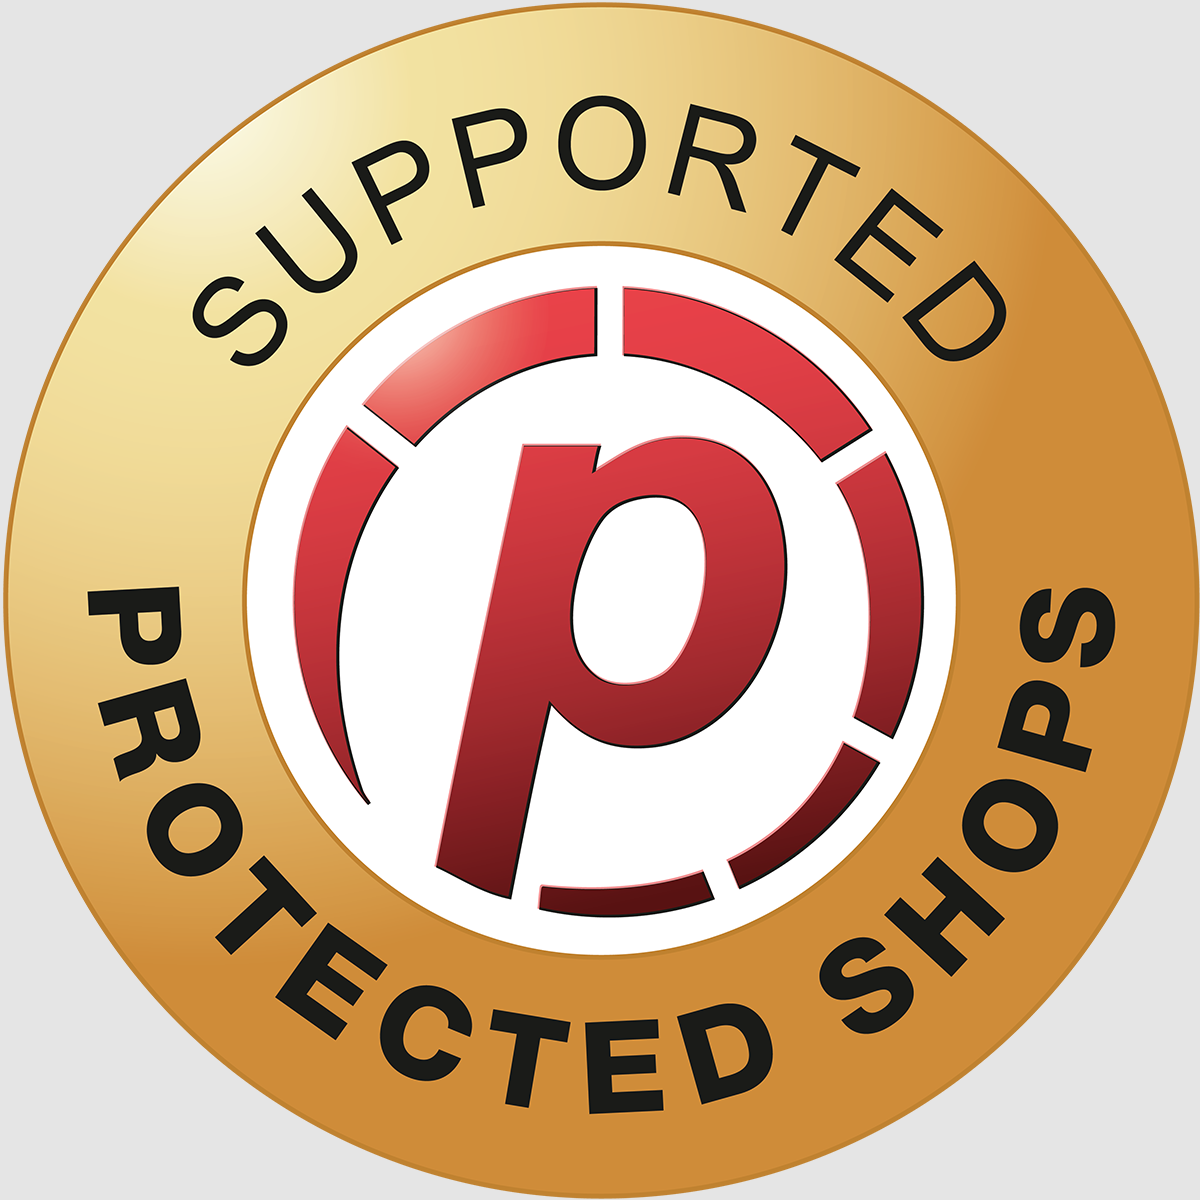 Shopify Store Protector app by Protected shops gmbh